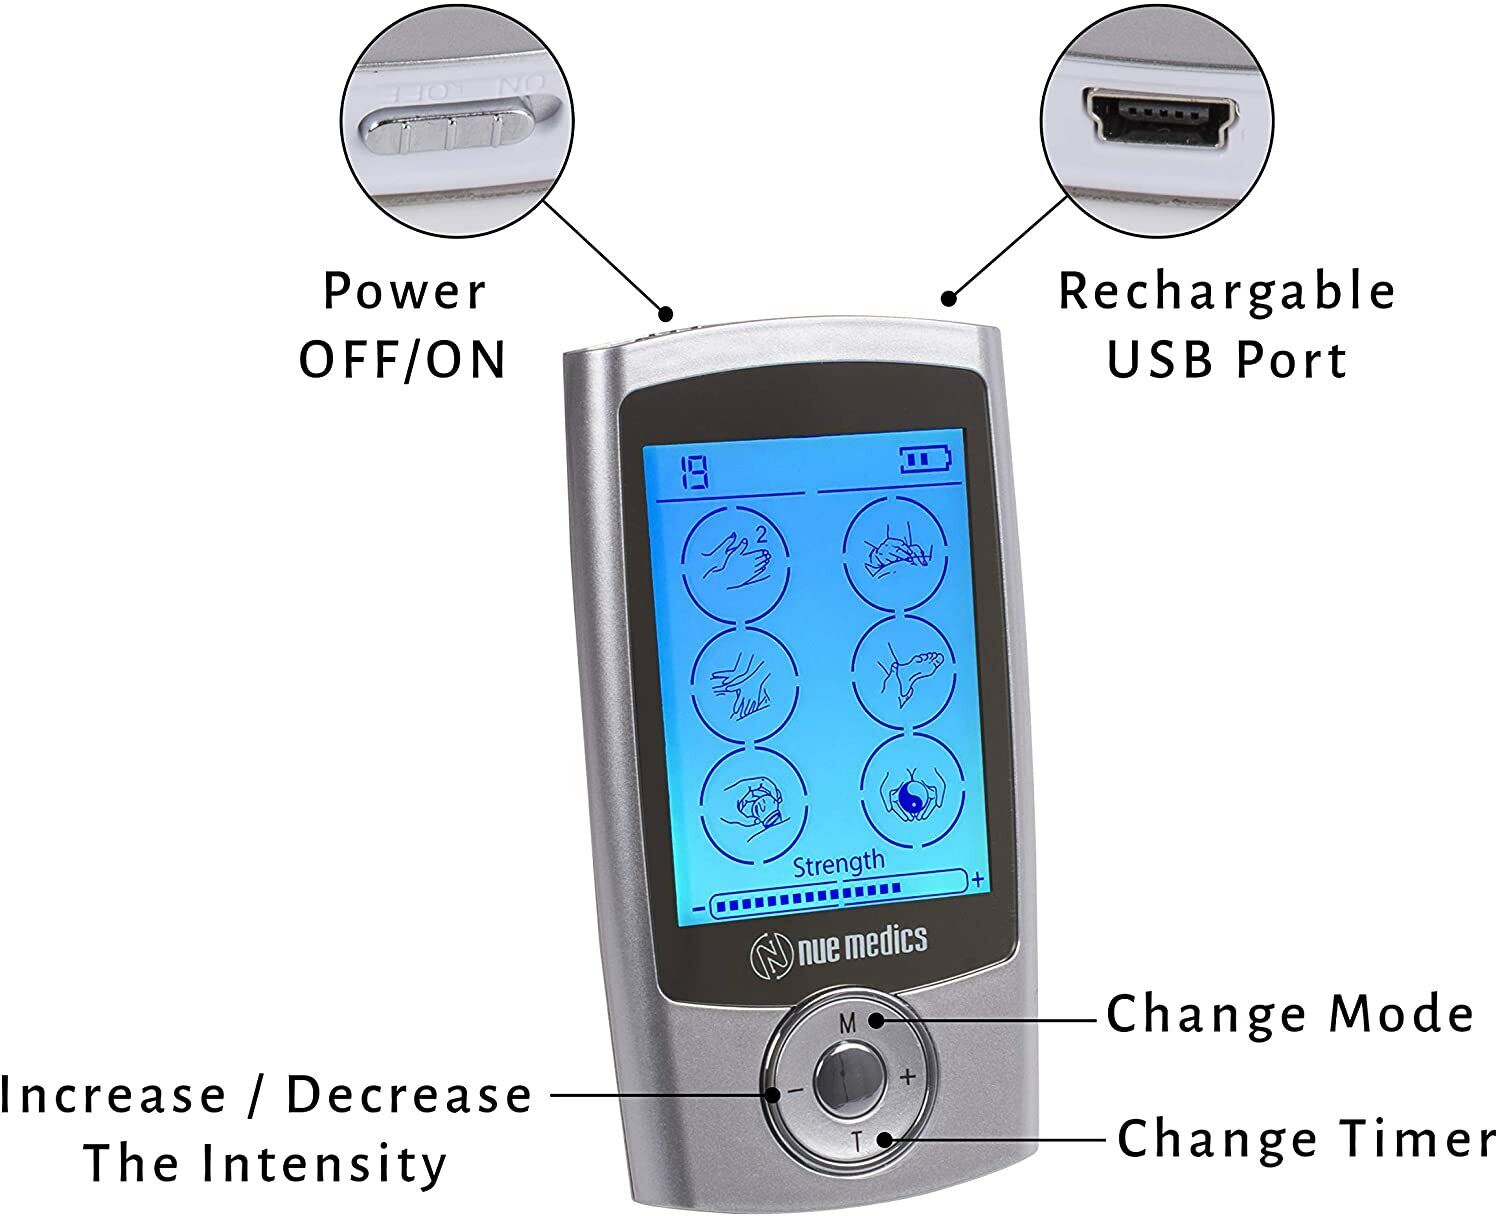 New Version 24 Modes PRO24AB iSelfCare® TENS unit & Muscle Stimulator